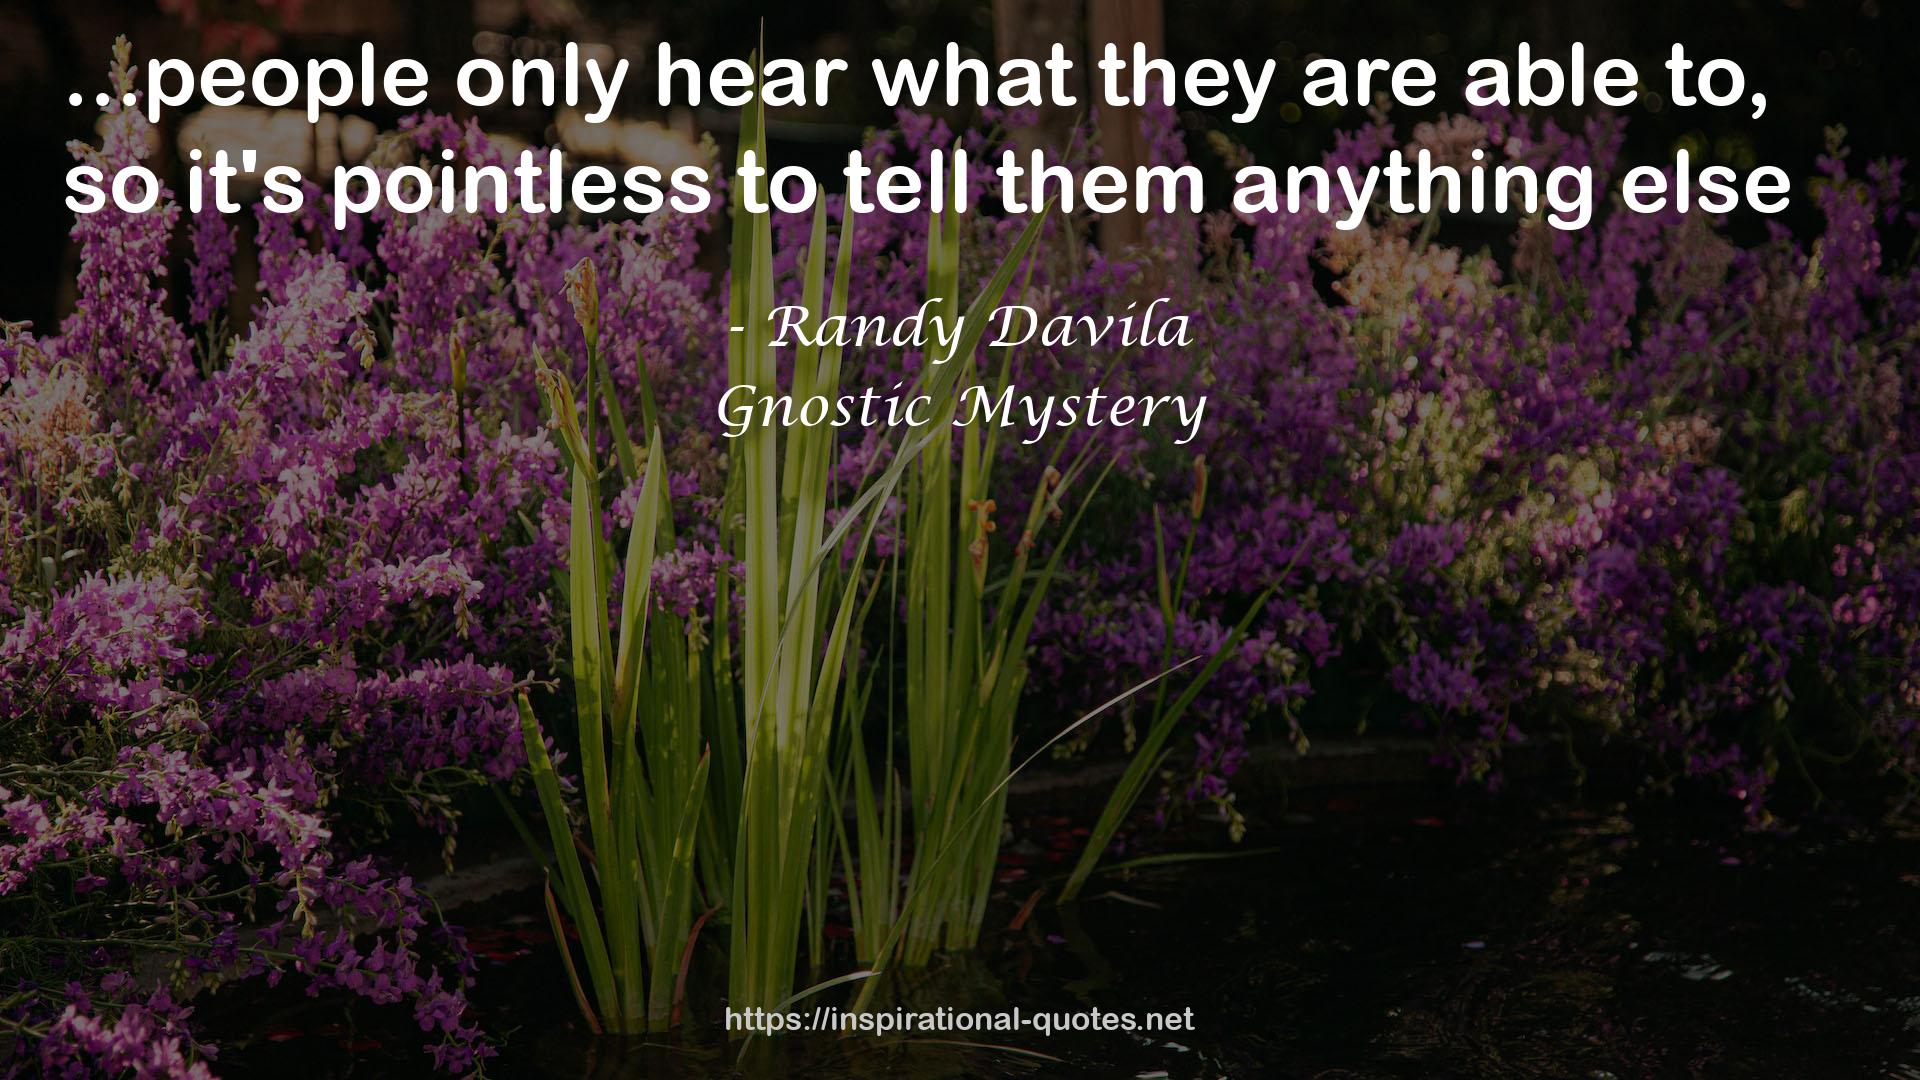 Gnostic Mystery QUOTES